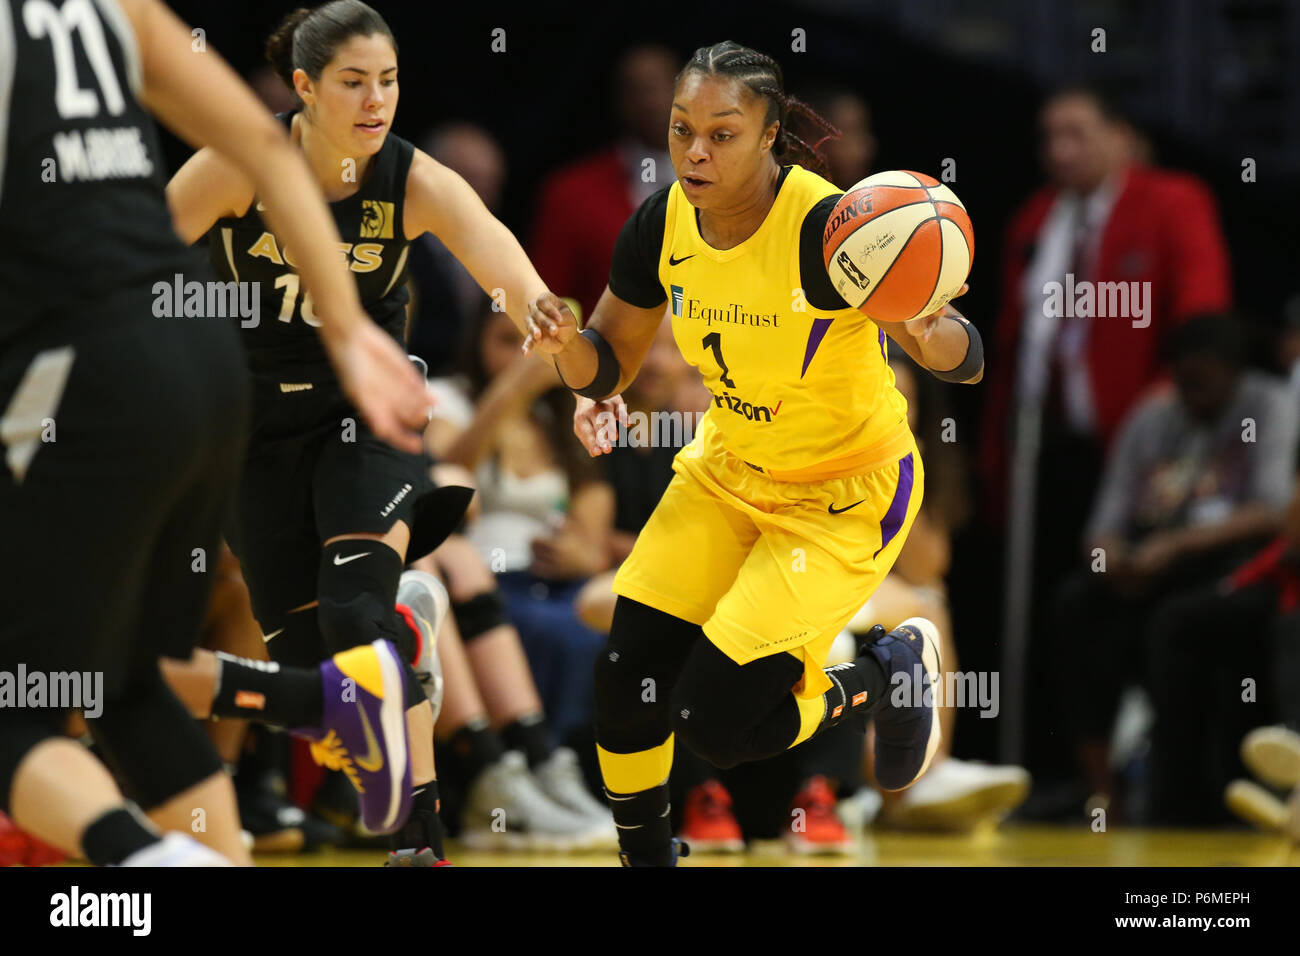 LOS ANGELES, CA - JULY 01: Los Angeles Sparks guard Odyssey Sims (1) brings the ball down court during a WNBA game between the Los Angeles Sparks and the Las Vegas Aces on July 01, 2018, at Staples Center, in Los Angeles, CA. Jordon Kelly/CSM Stock Photo